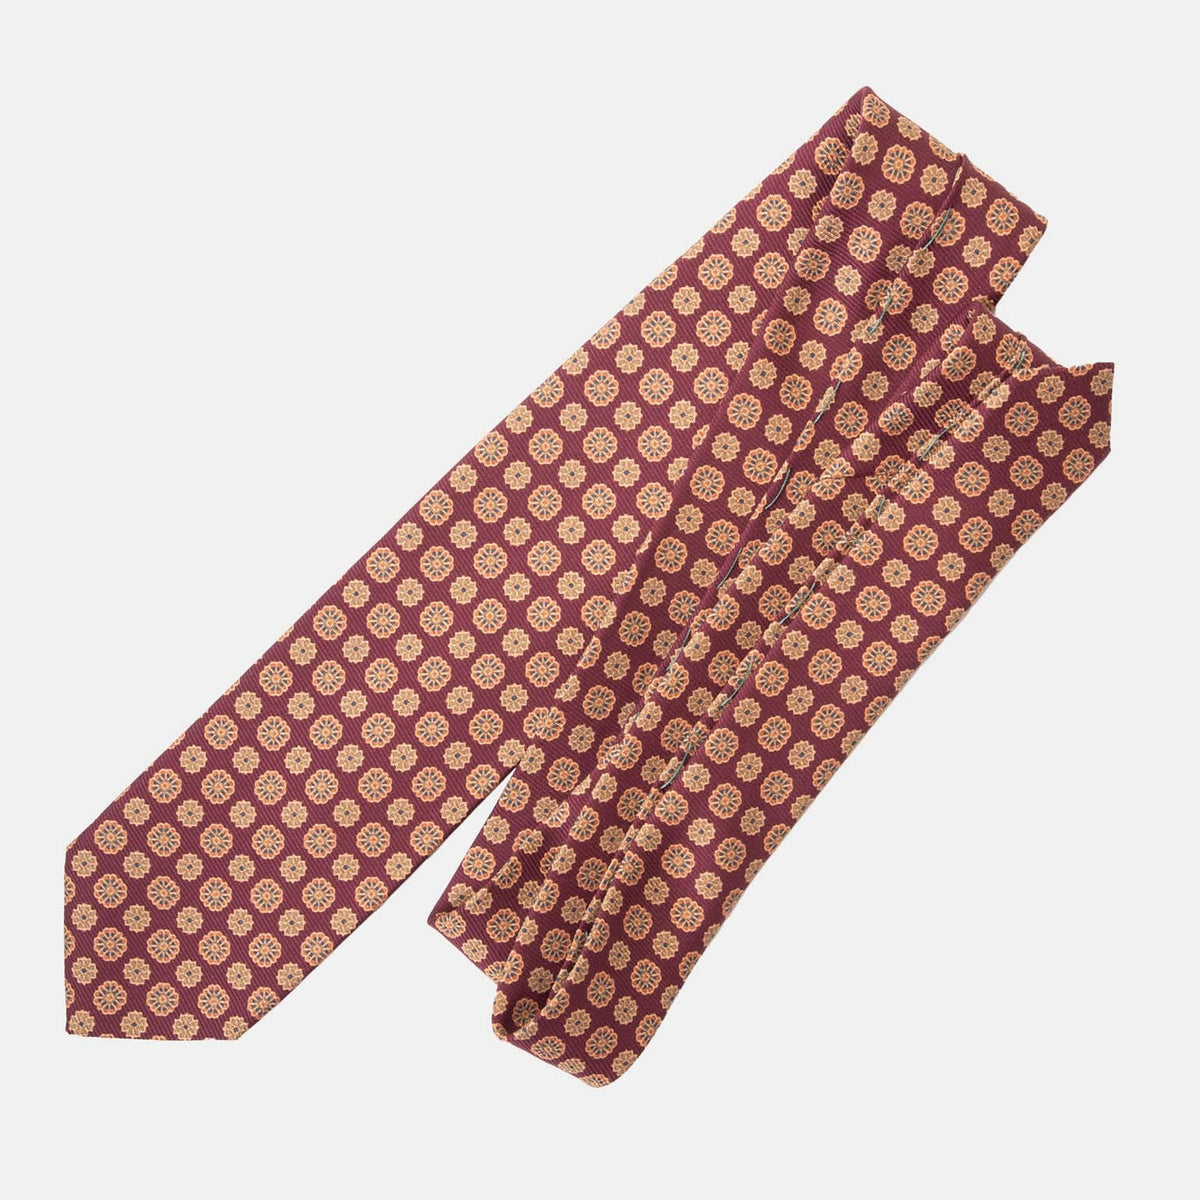 Extra Long Burgundy Medallion Silk Tie - Made in Italy